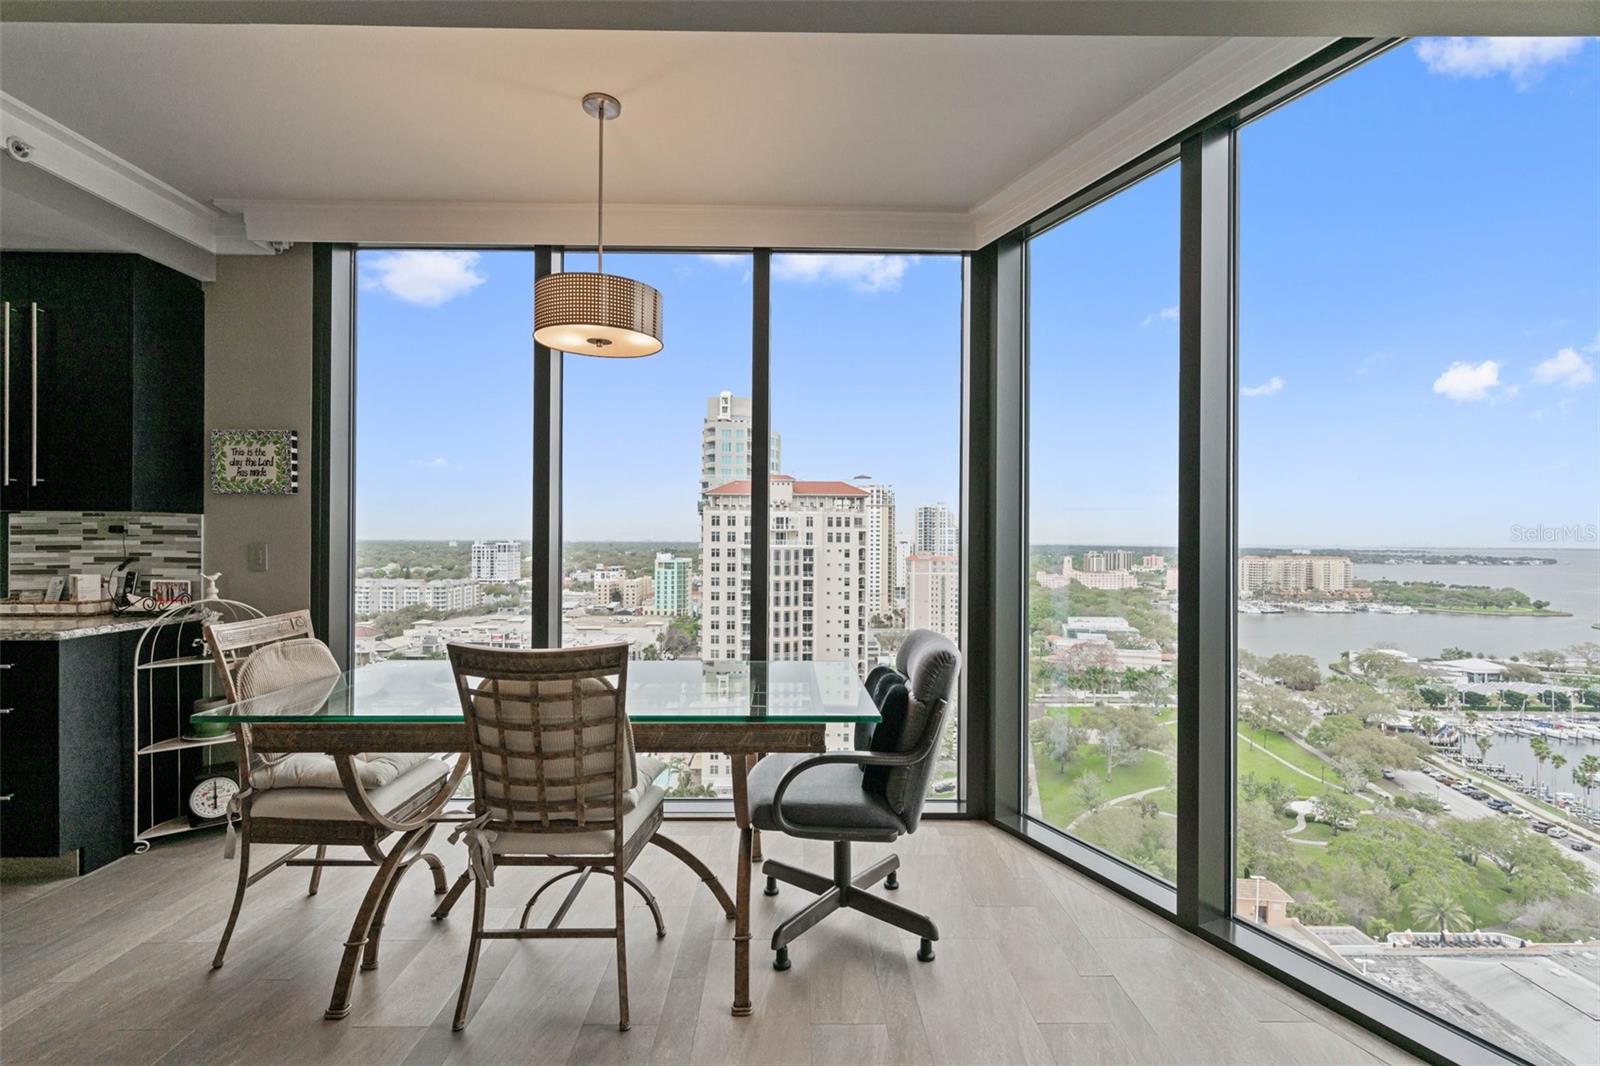 This corner unit shows the BEST location and views all around!